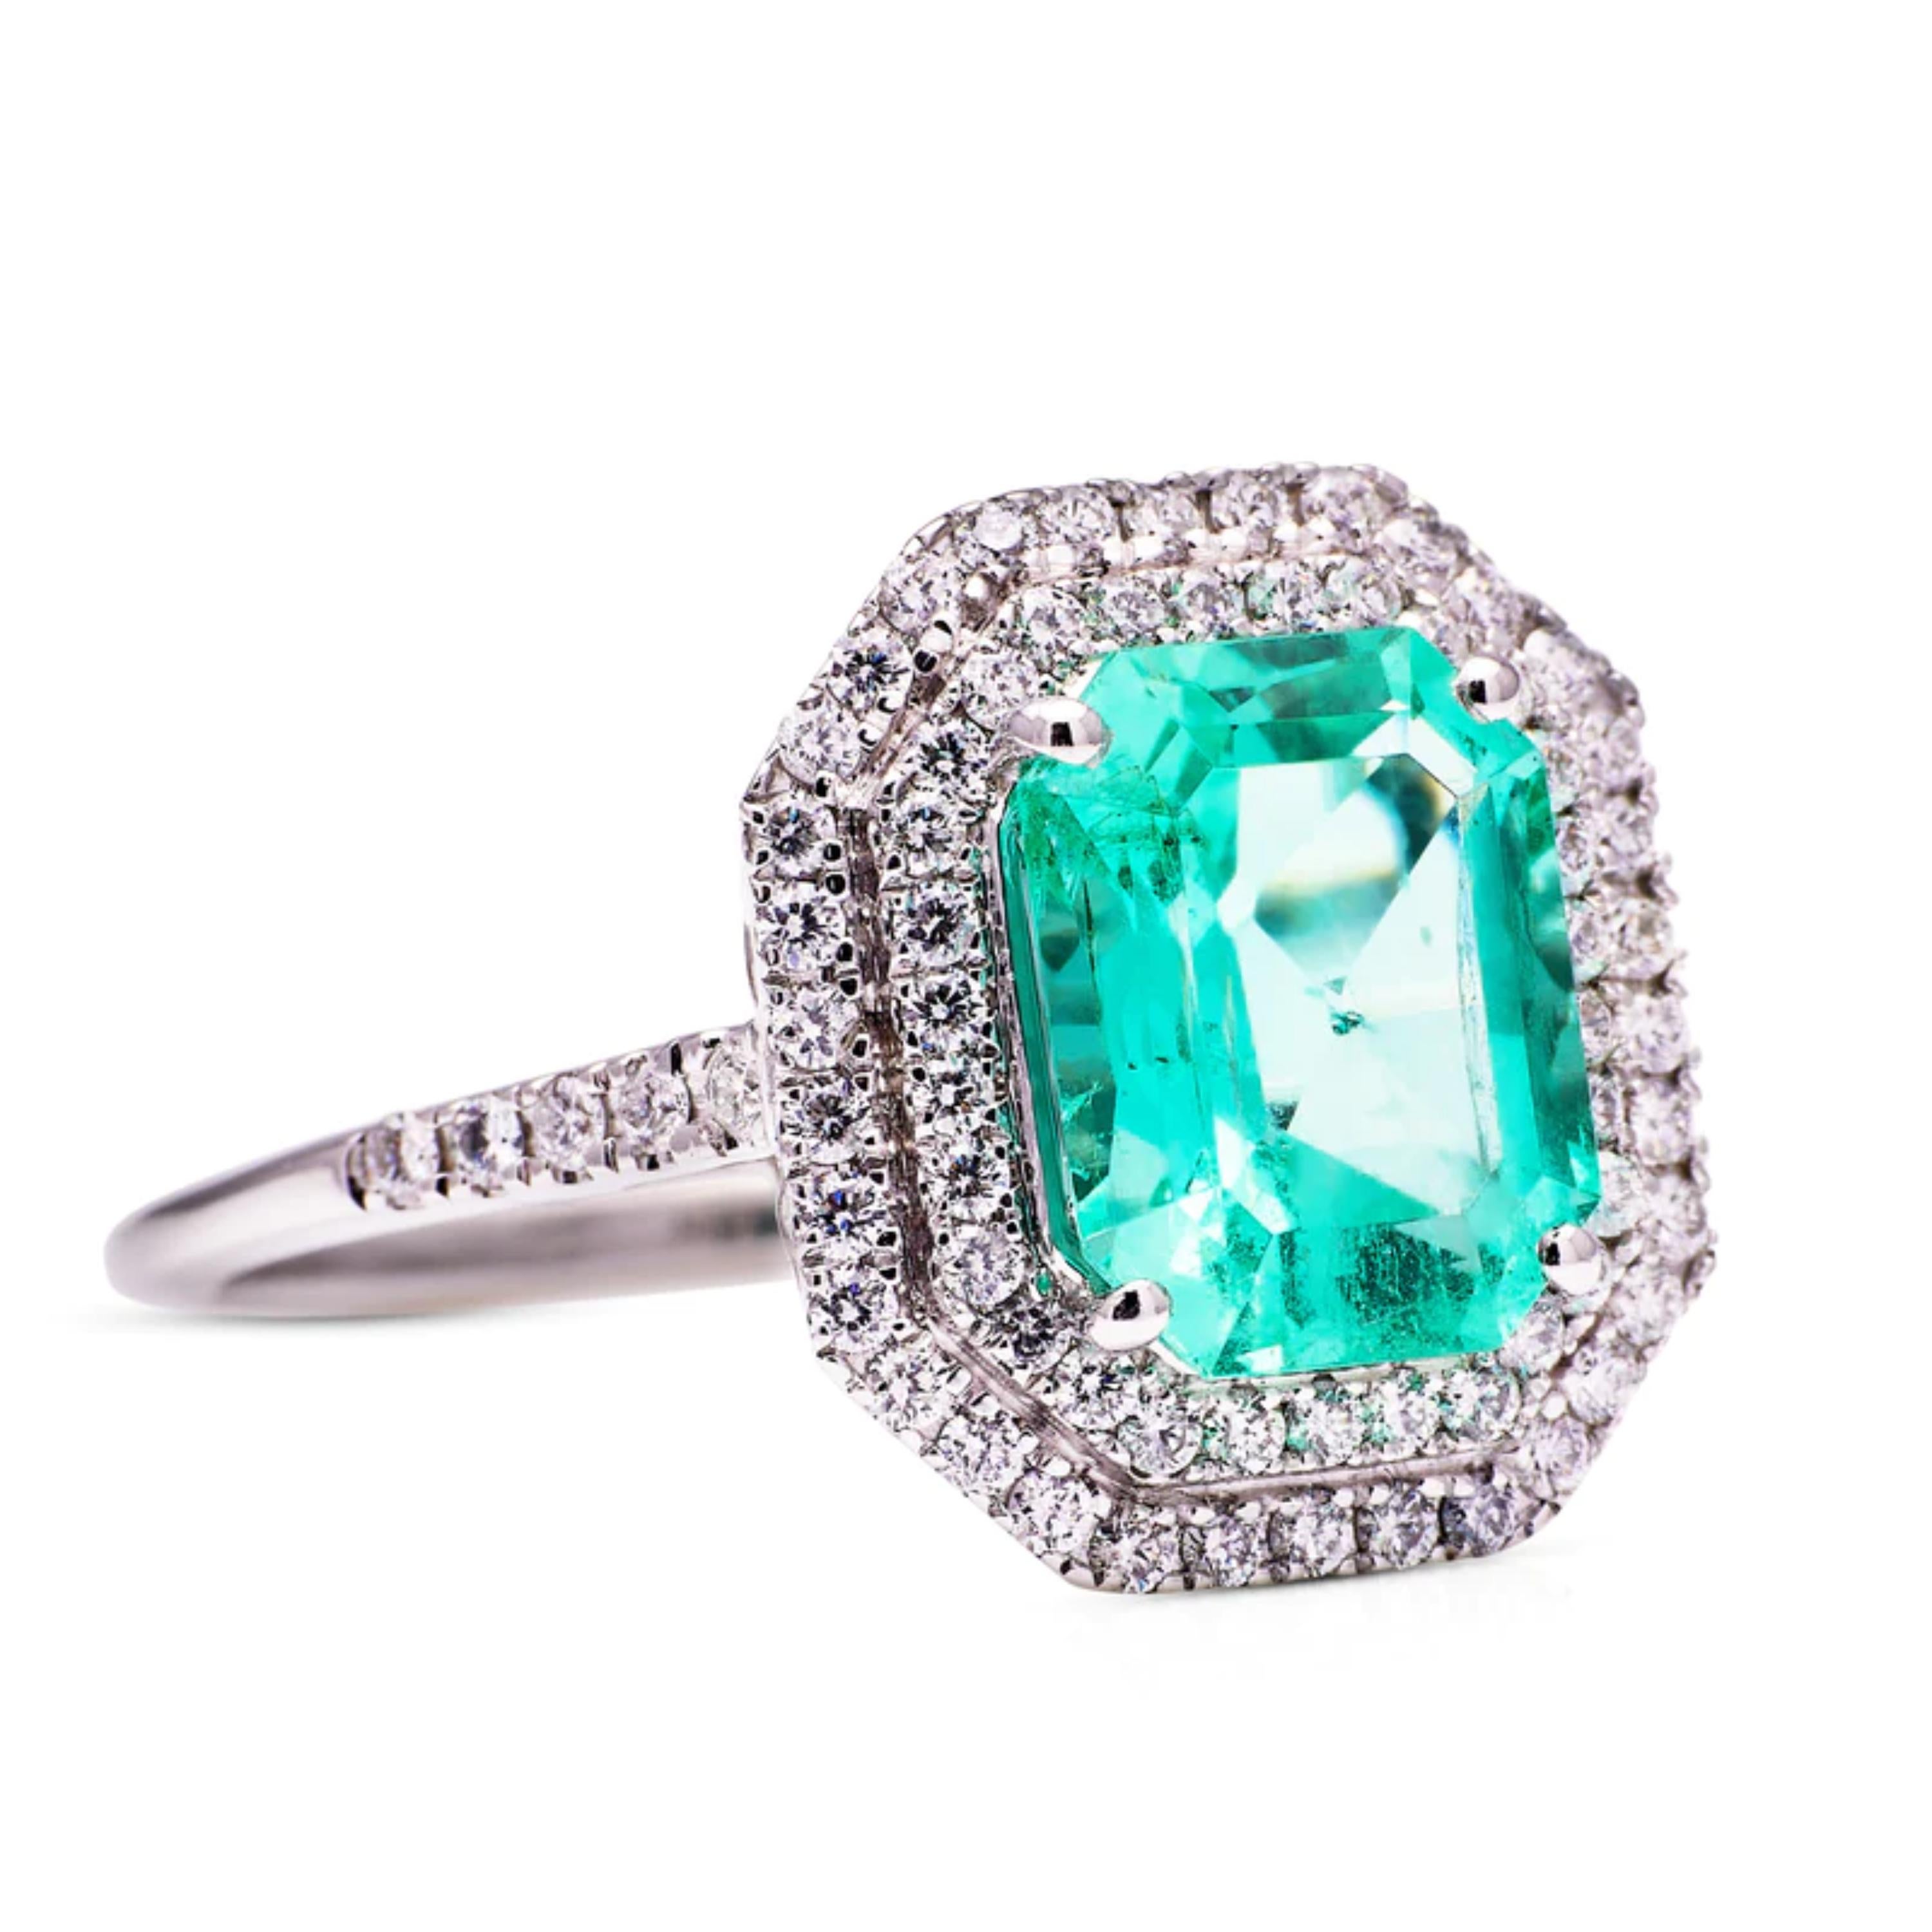 Emerald Cut 2.50 Carat Colombian Emerald Diamond Engagement Ring Halo Emerald Cocktail Ring For Sale